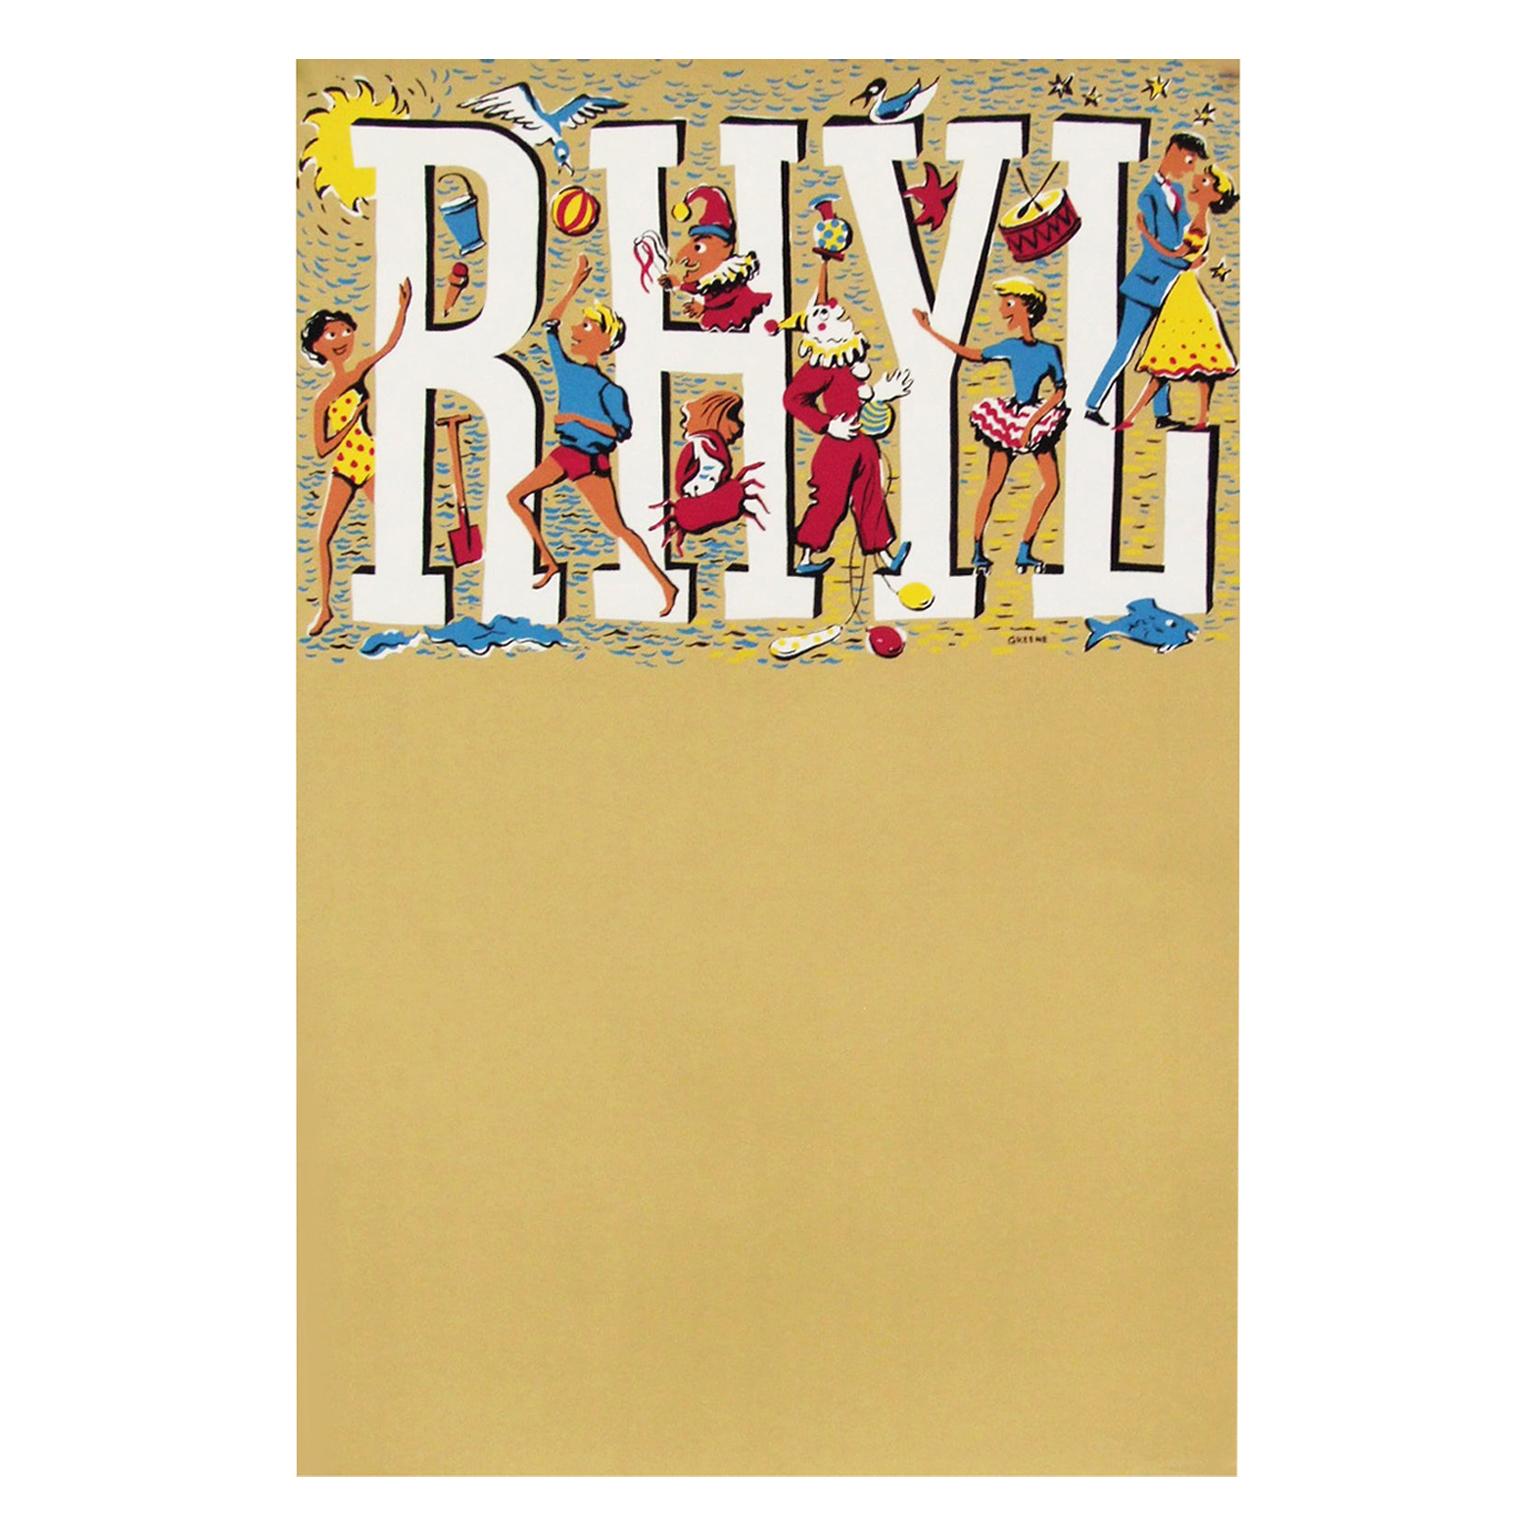 1960s promotional travel poster for Rhyl, Wales designed by Margaret Greene, UK. Rolled.

Measures: L 76cm x W 50.5cm. 

   